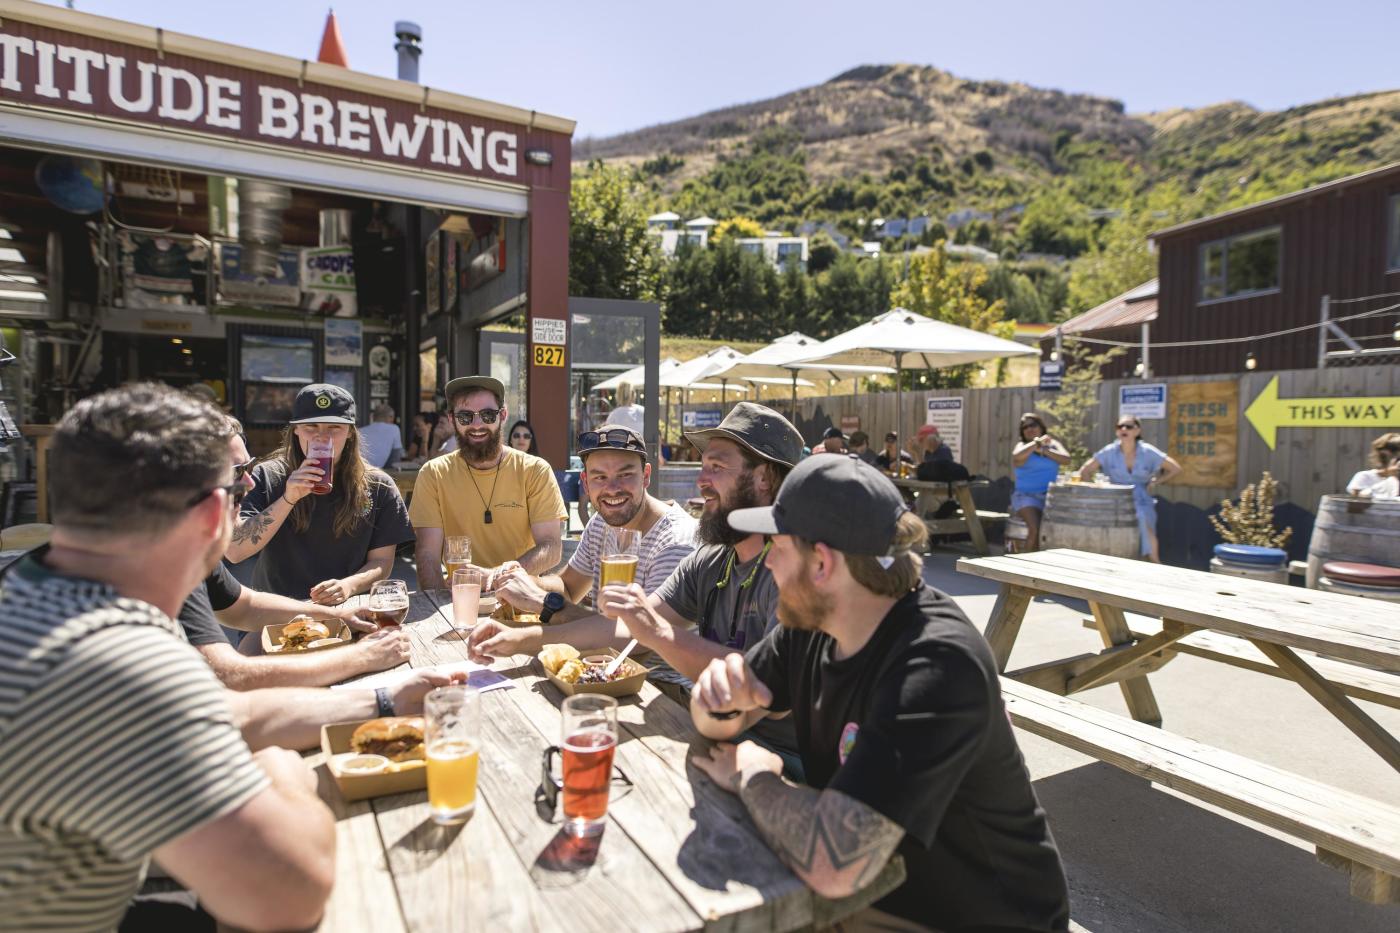 A group of people enjoying lunch and beers at Altitude Brewing